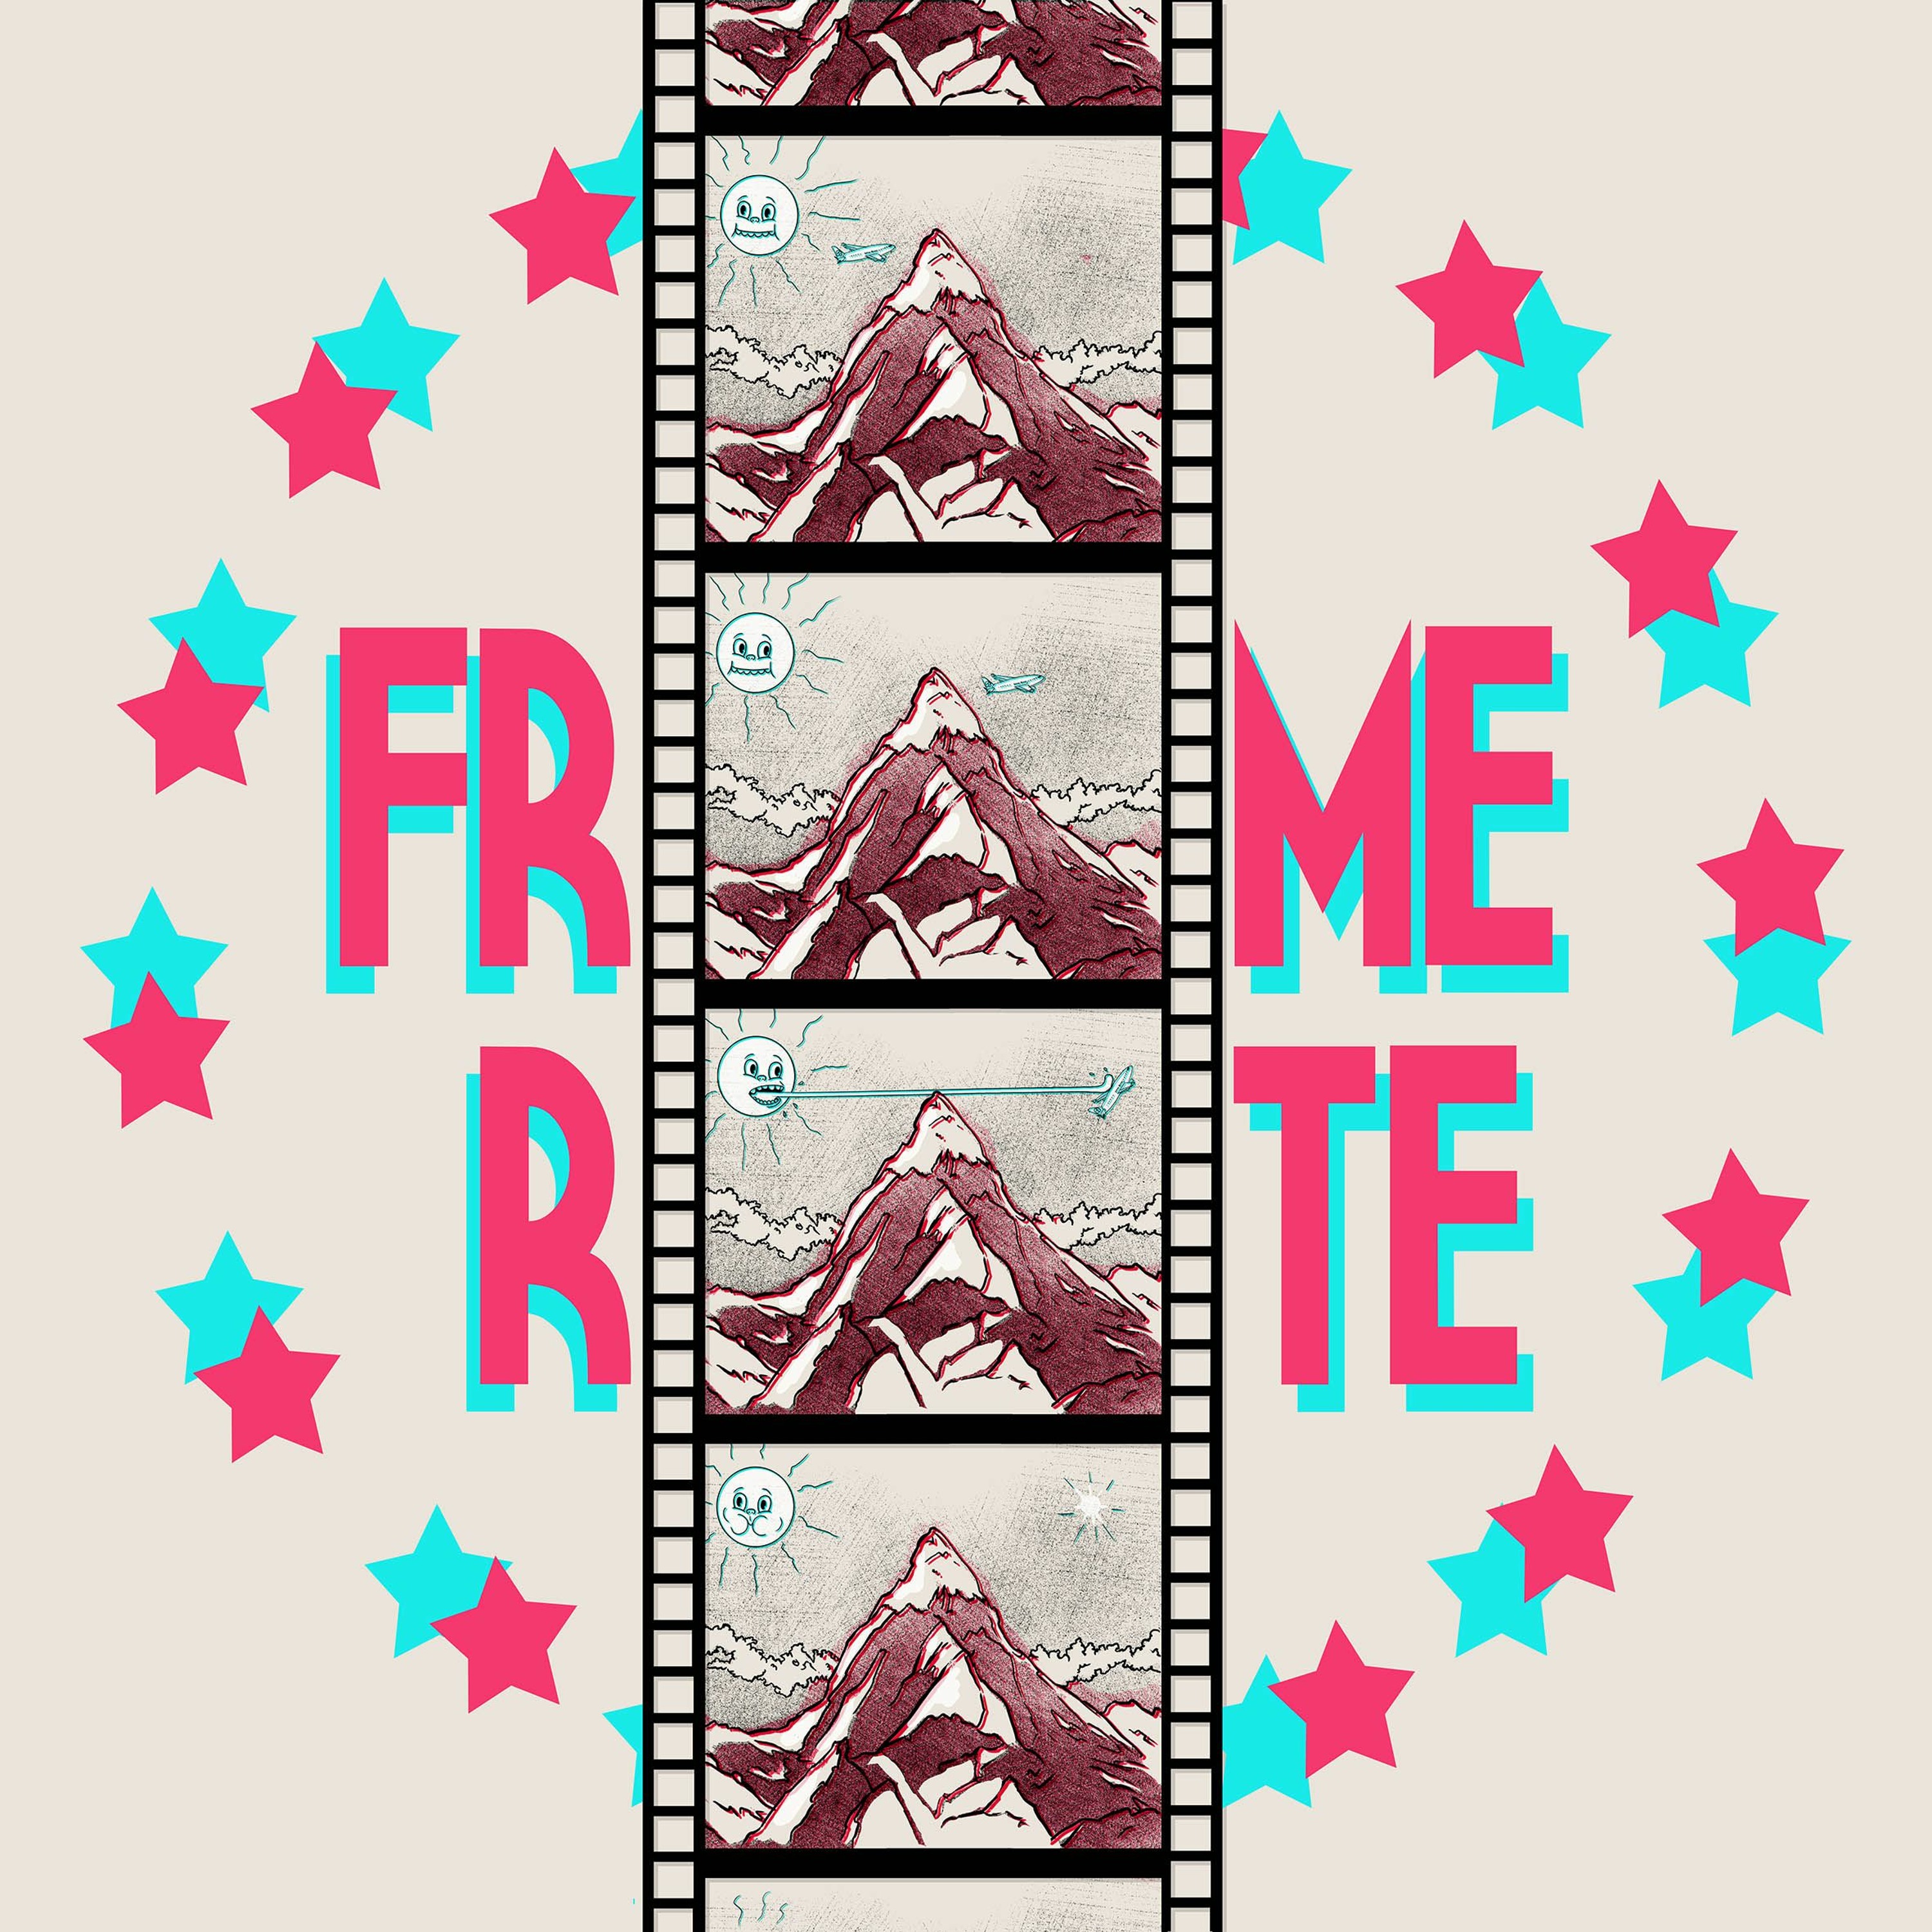 341. Frame Rate: Bee Movie (Feat. Katie Goldin)